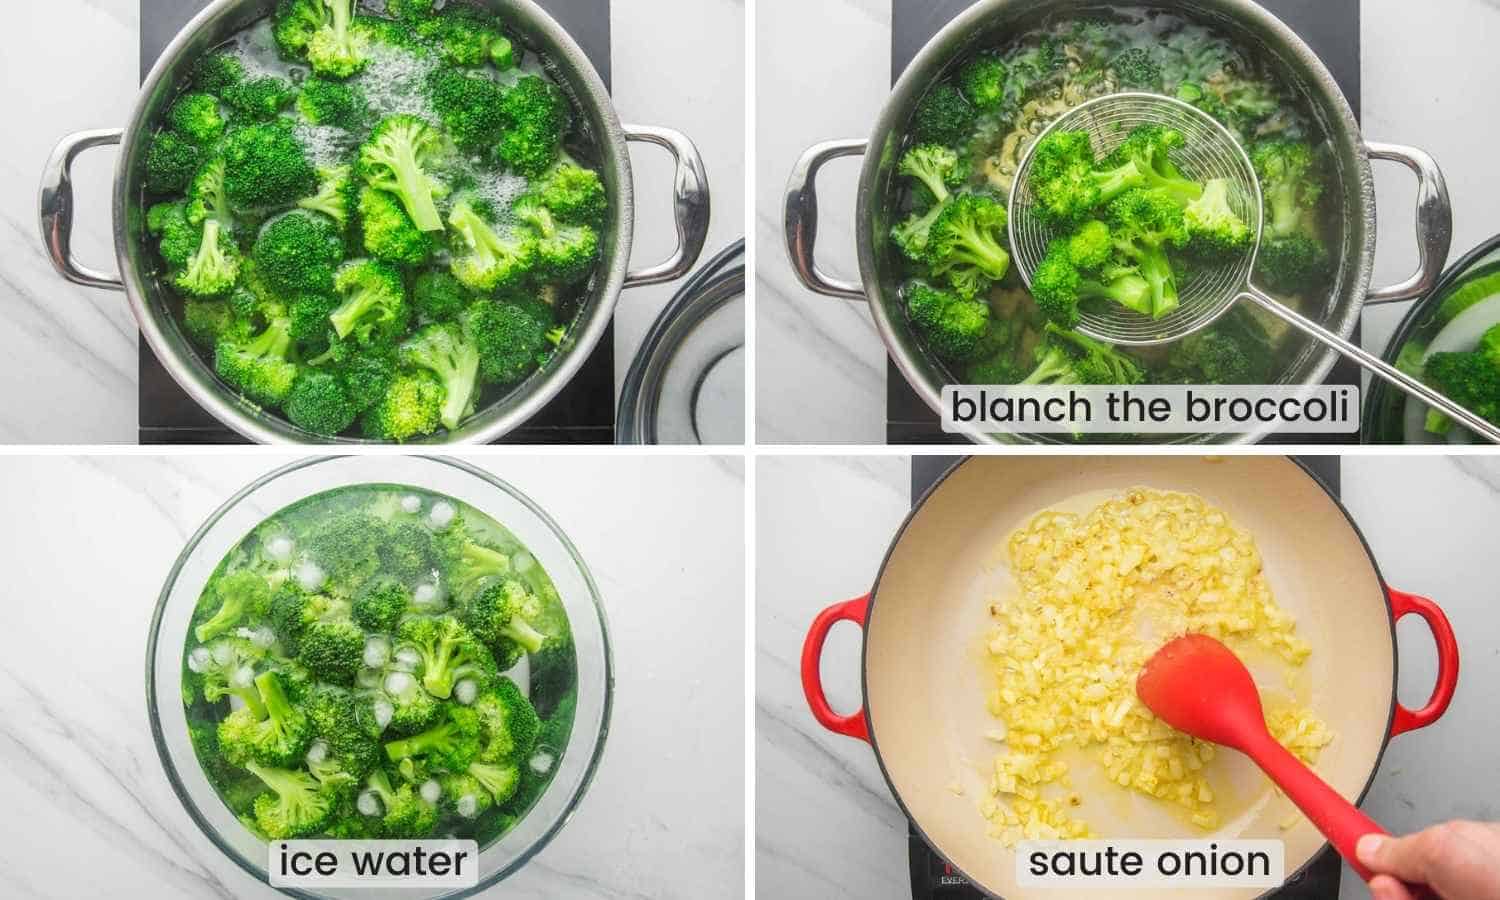 Collage of four images showing how to blanch broccoli and saute onions